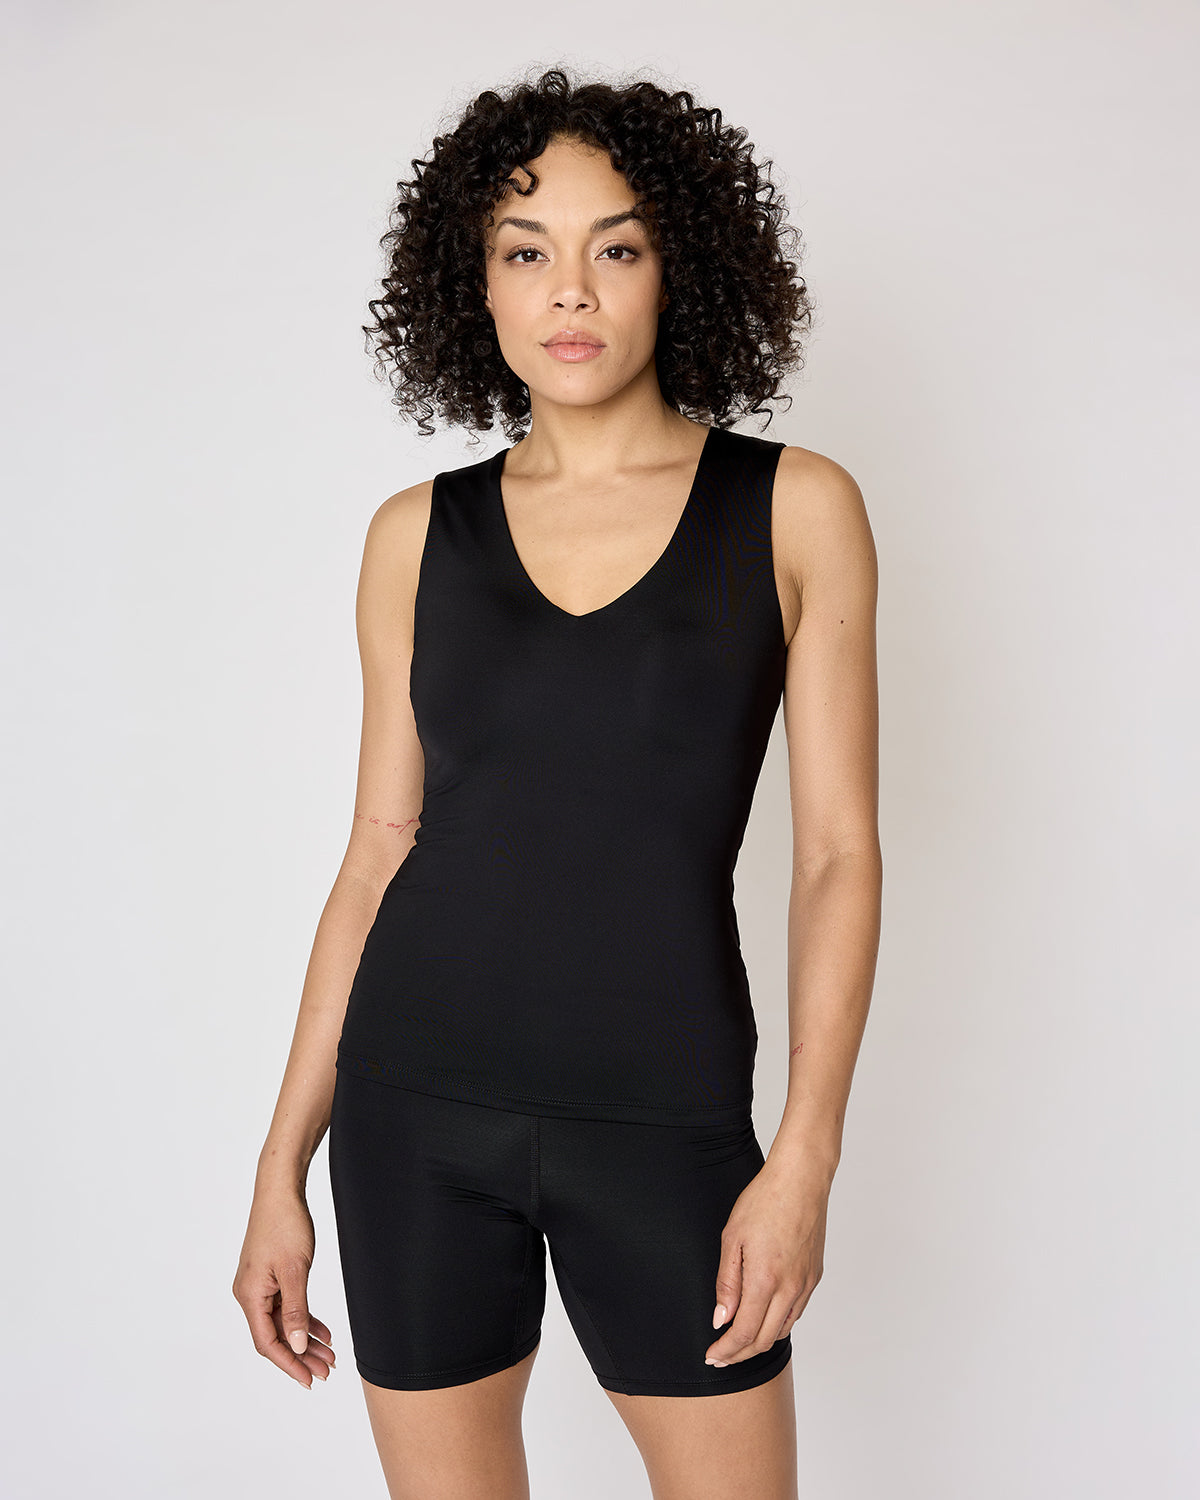 "#color_Black|Azi is 5'9" and wears a size S